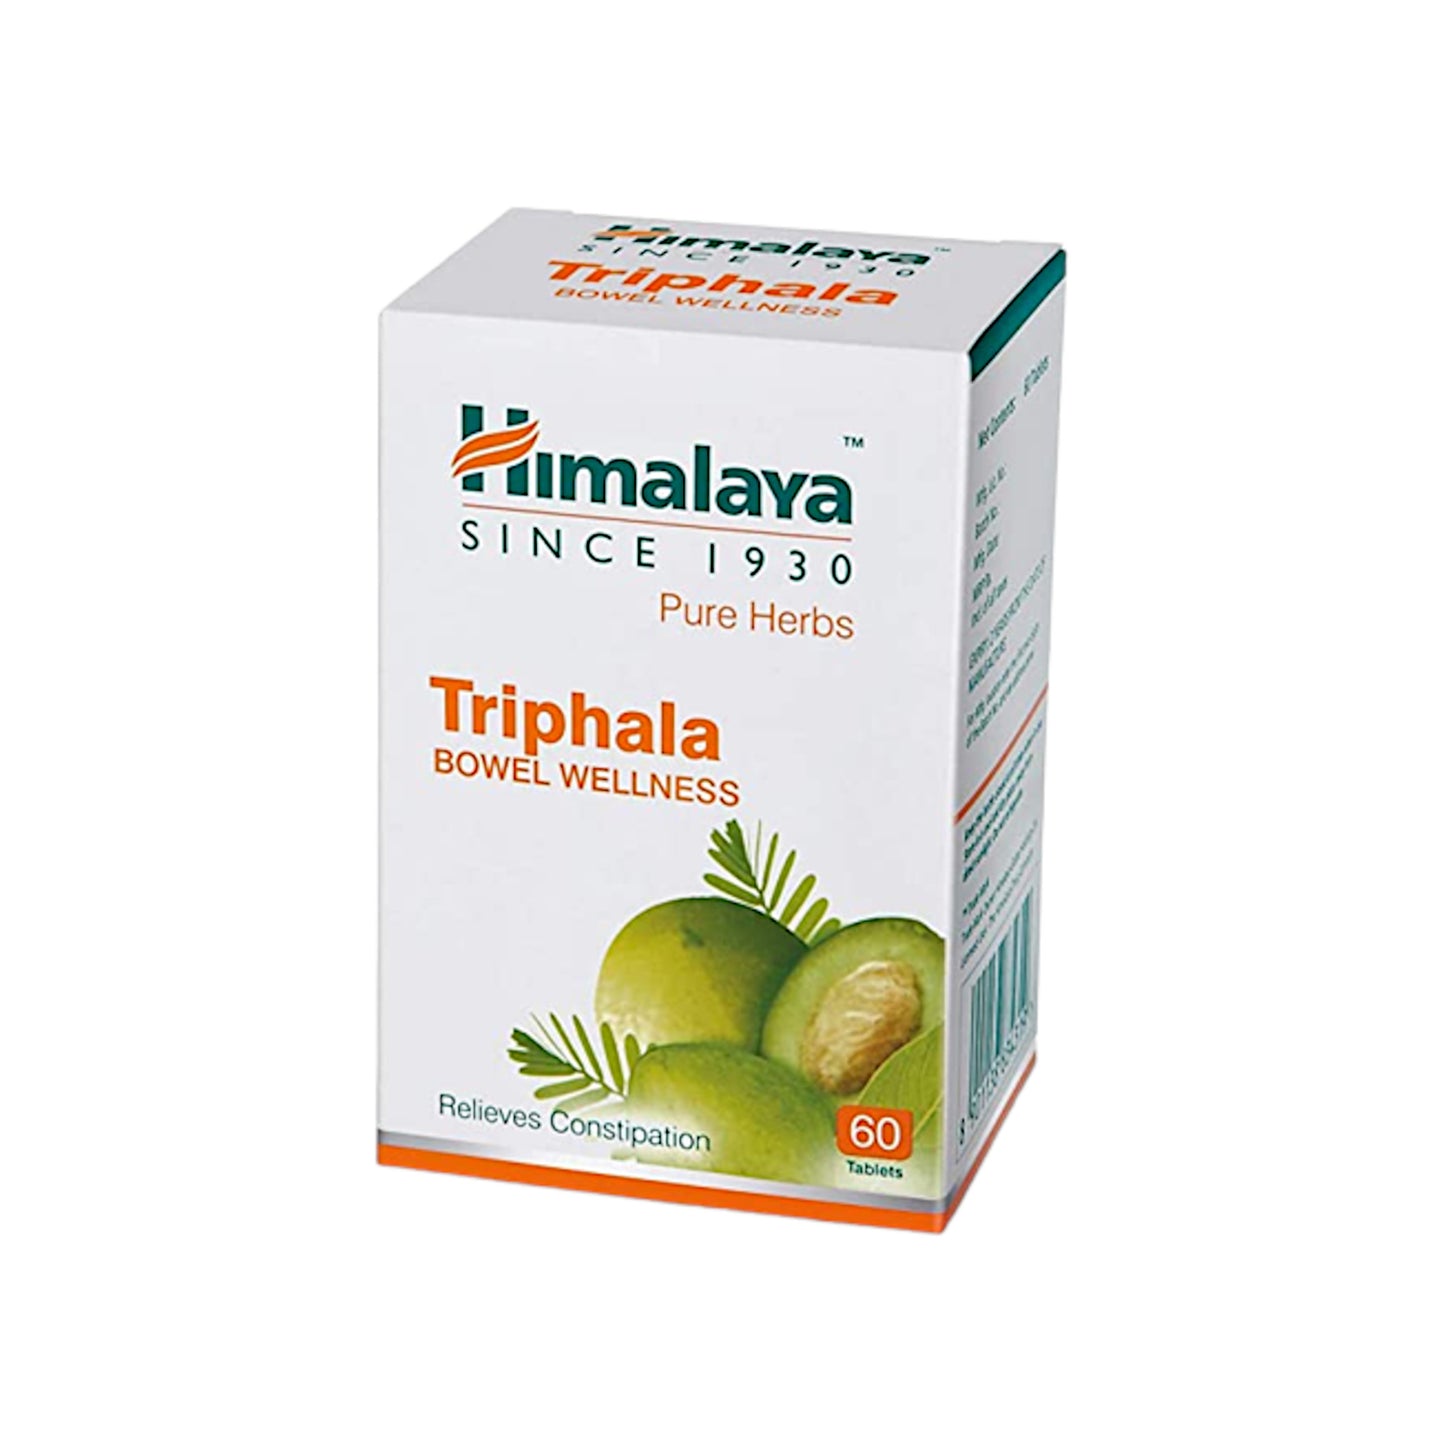 Image: Himalaya Herbals Triphala 60 Tablets - Supports digestive health, detoxification, and overall well-being.